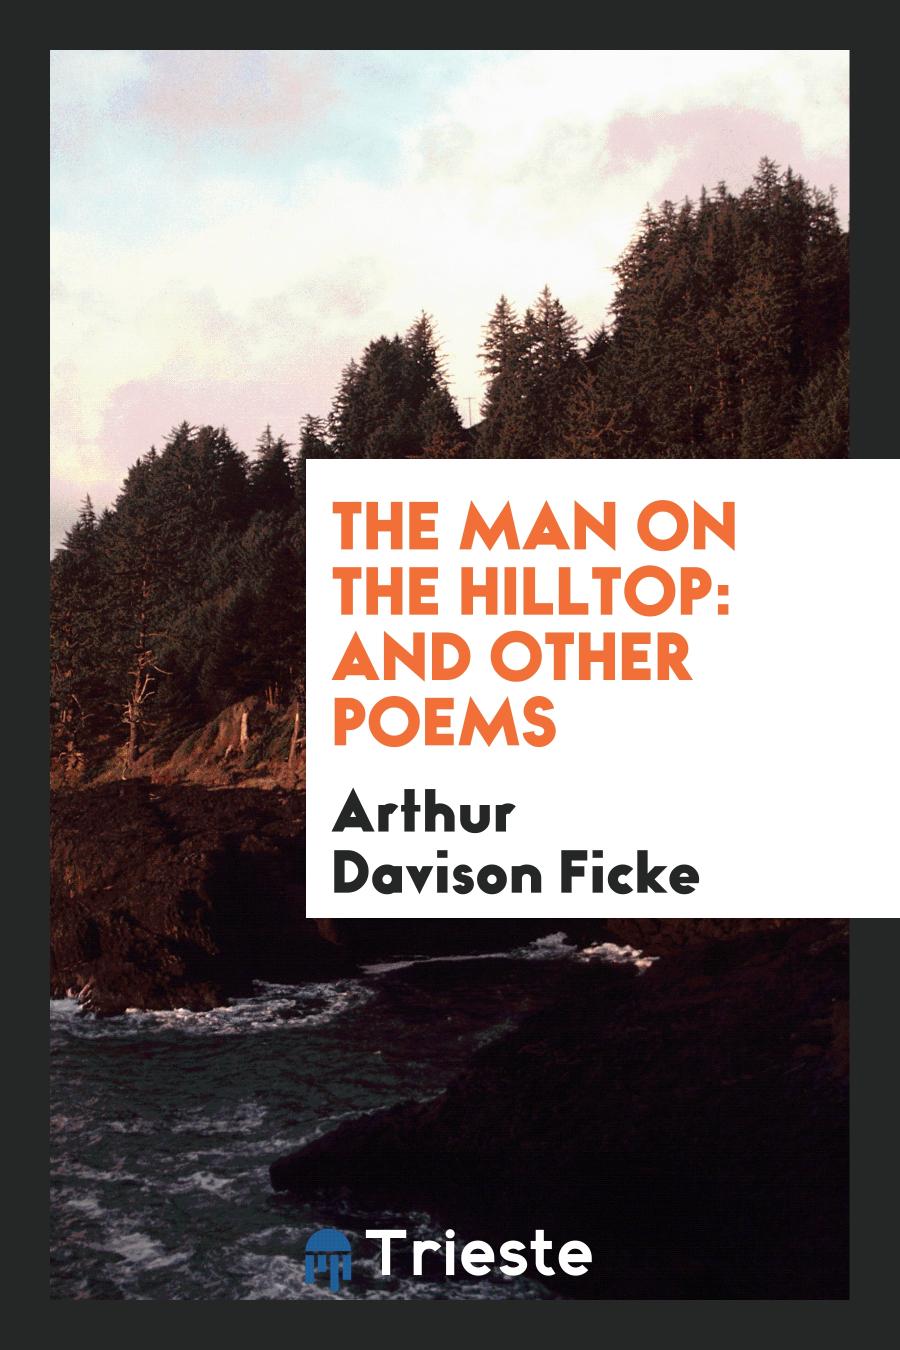 The Man on the Hilltop: And Other Poems